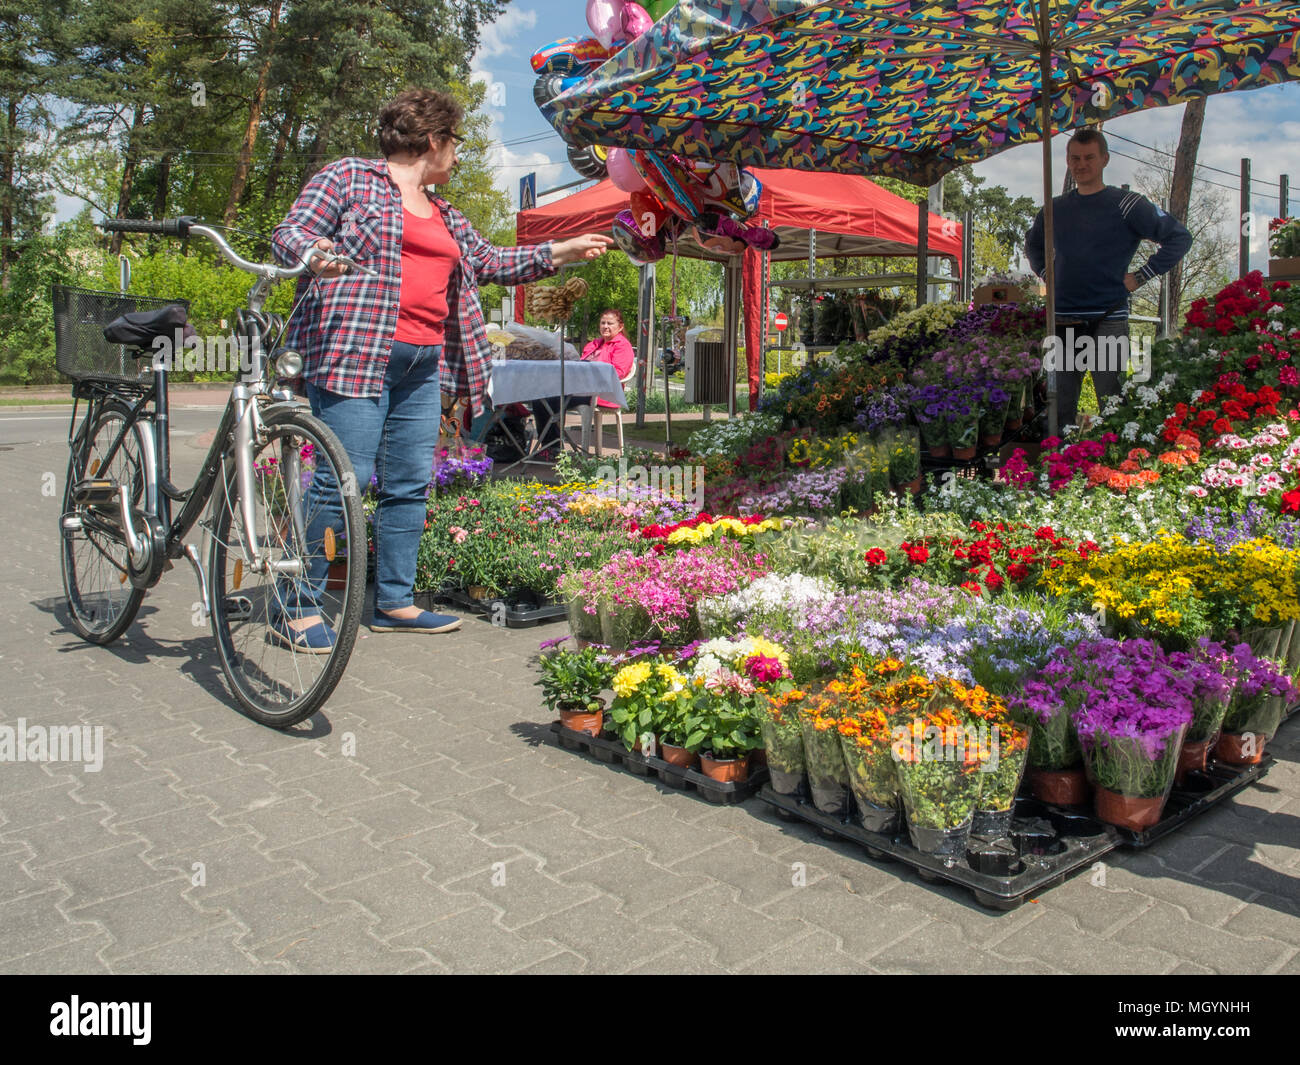 Jozefow, Poland - May 14, 2017: Spring flowers market with plenty of different, colorful plants Stock Photo